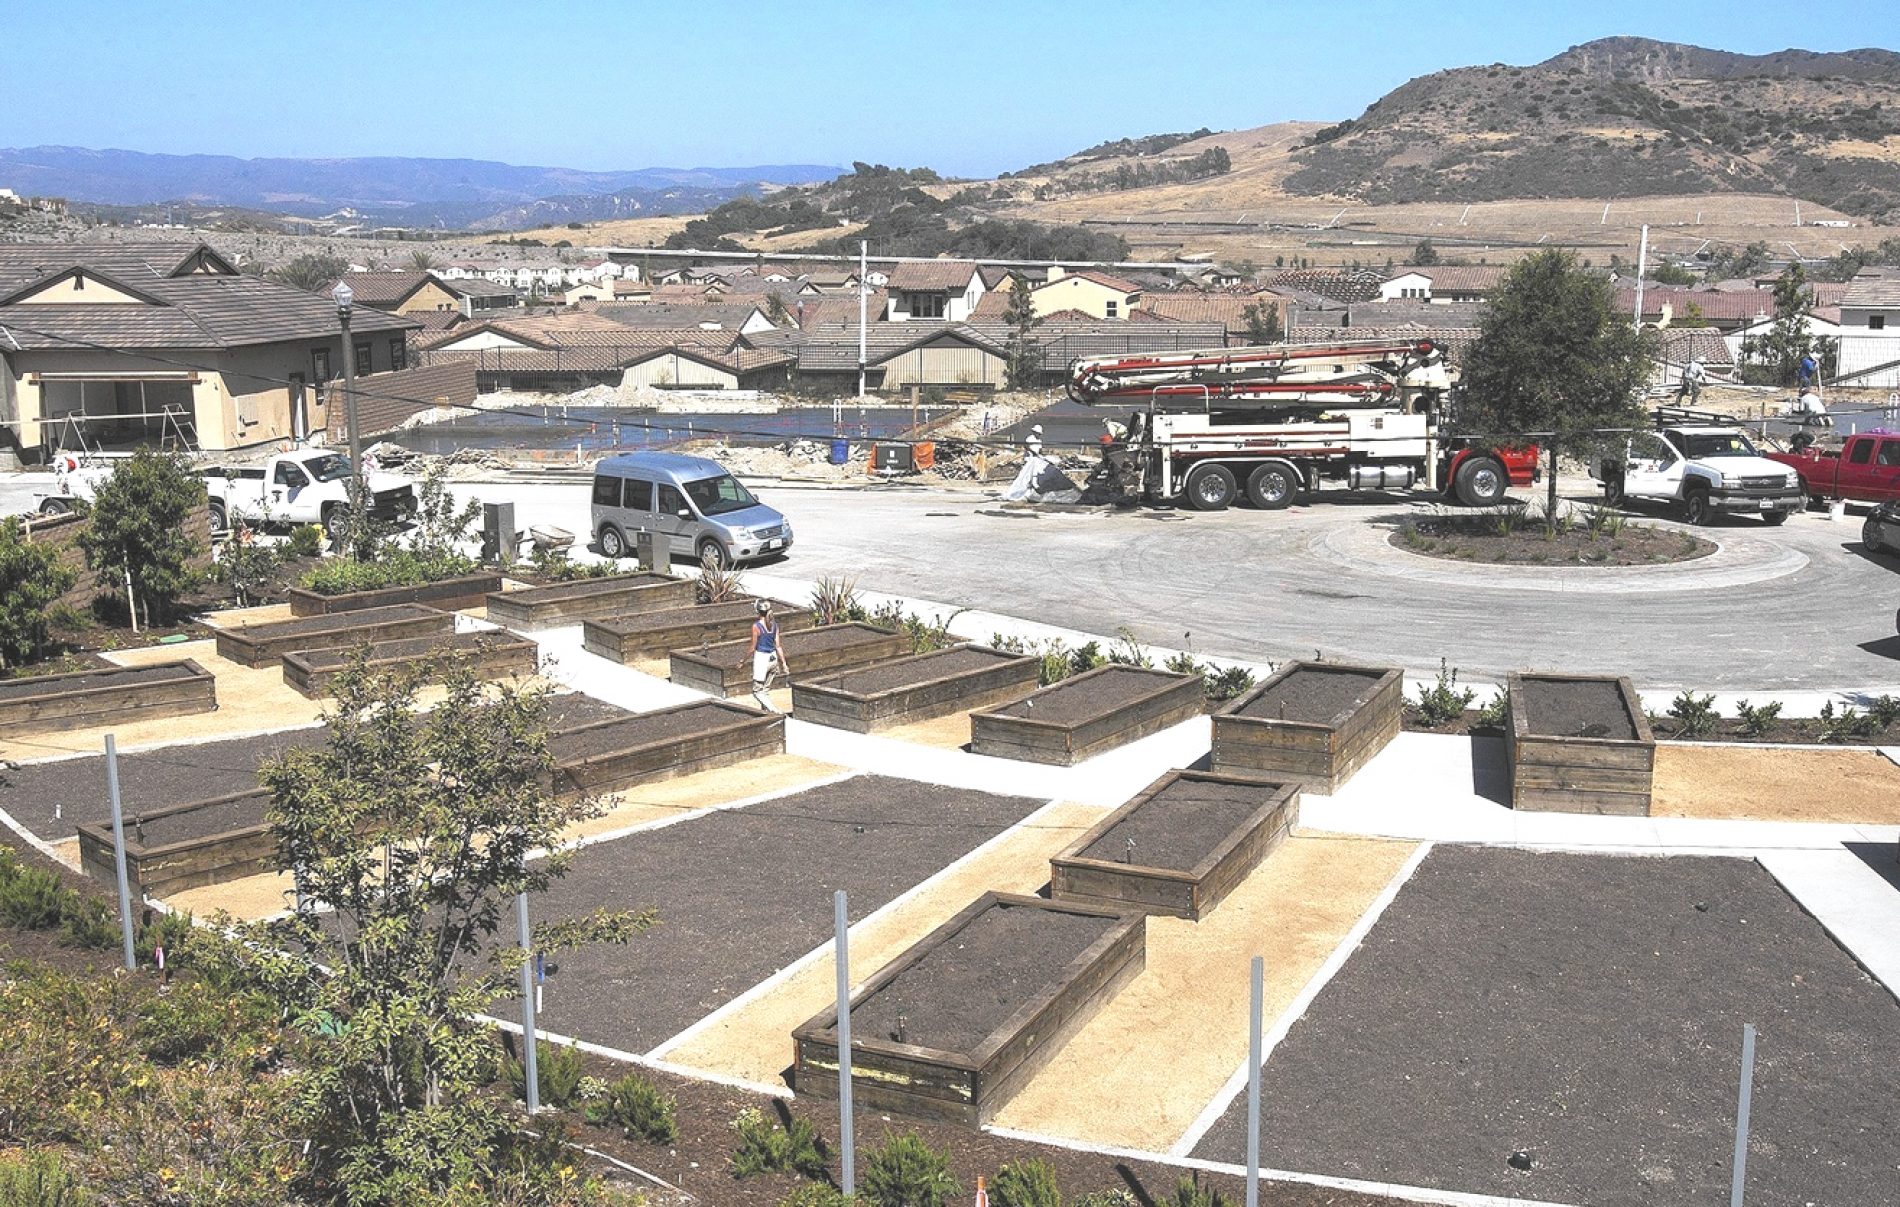 Next Phase of Rancho Mission Viejo in Full Swing